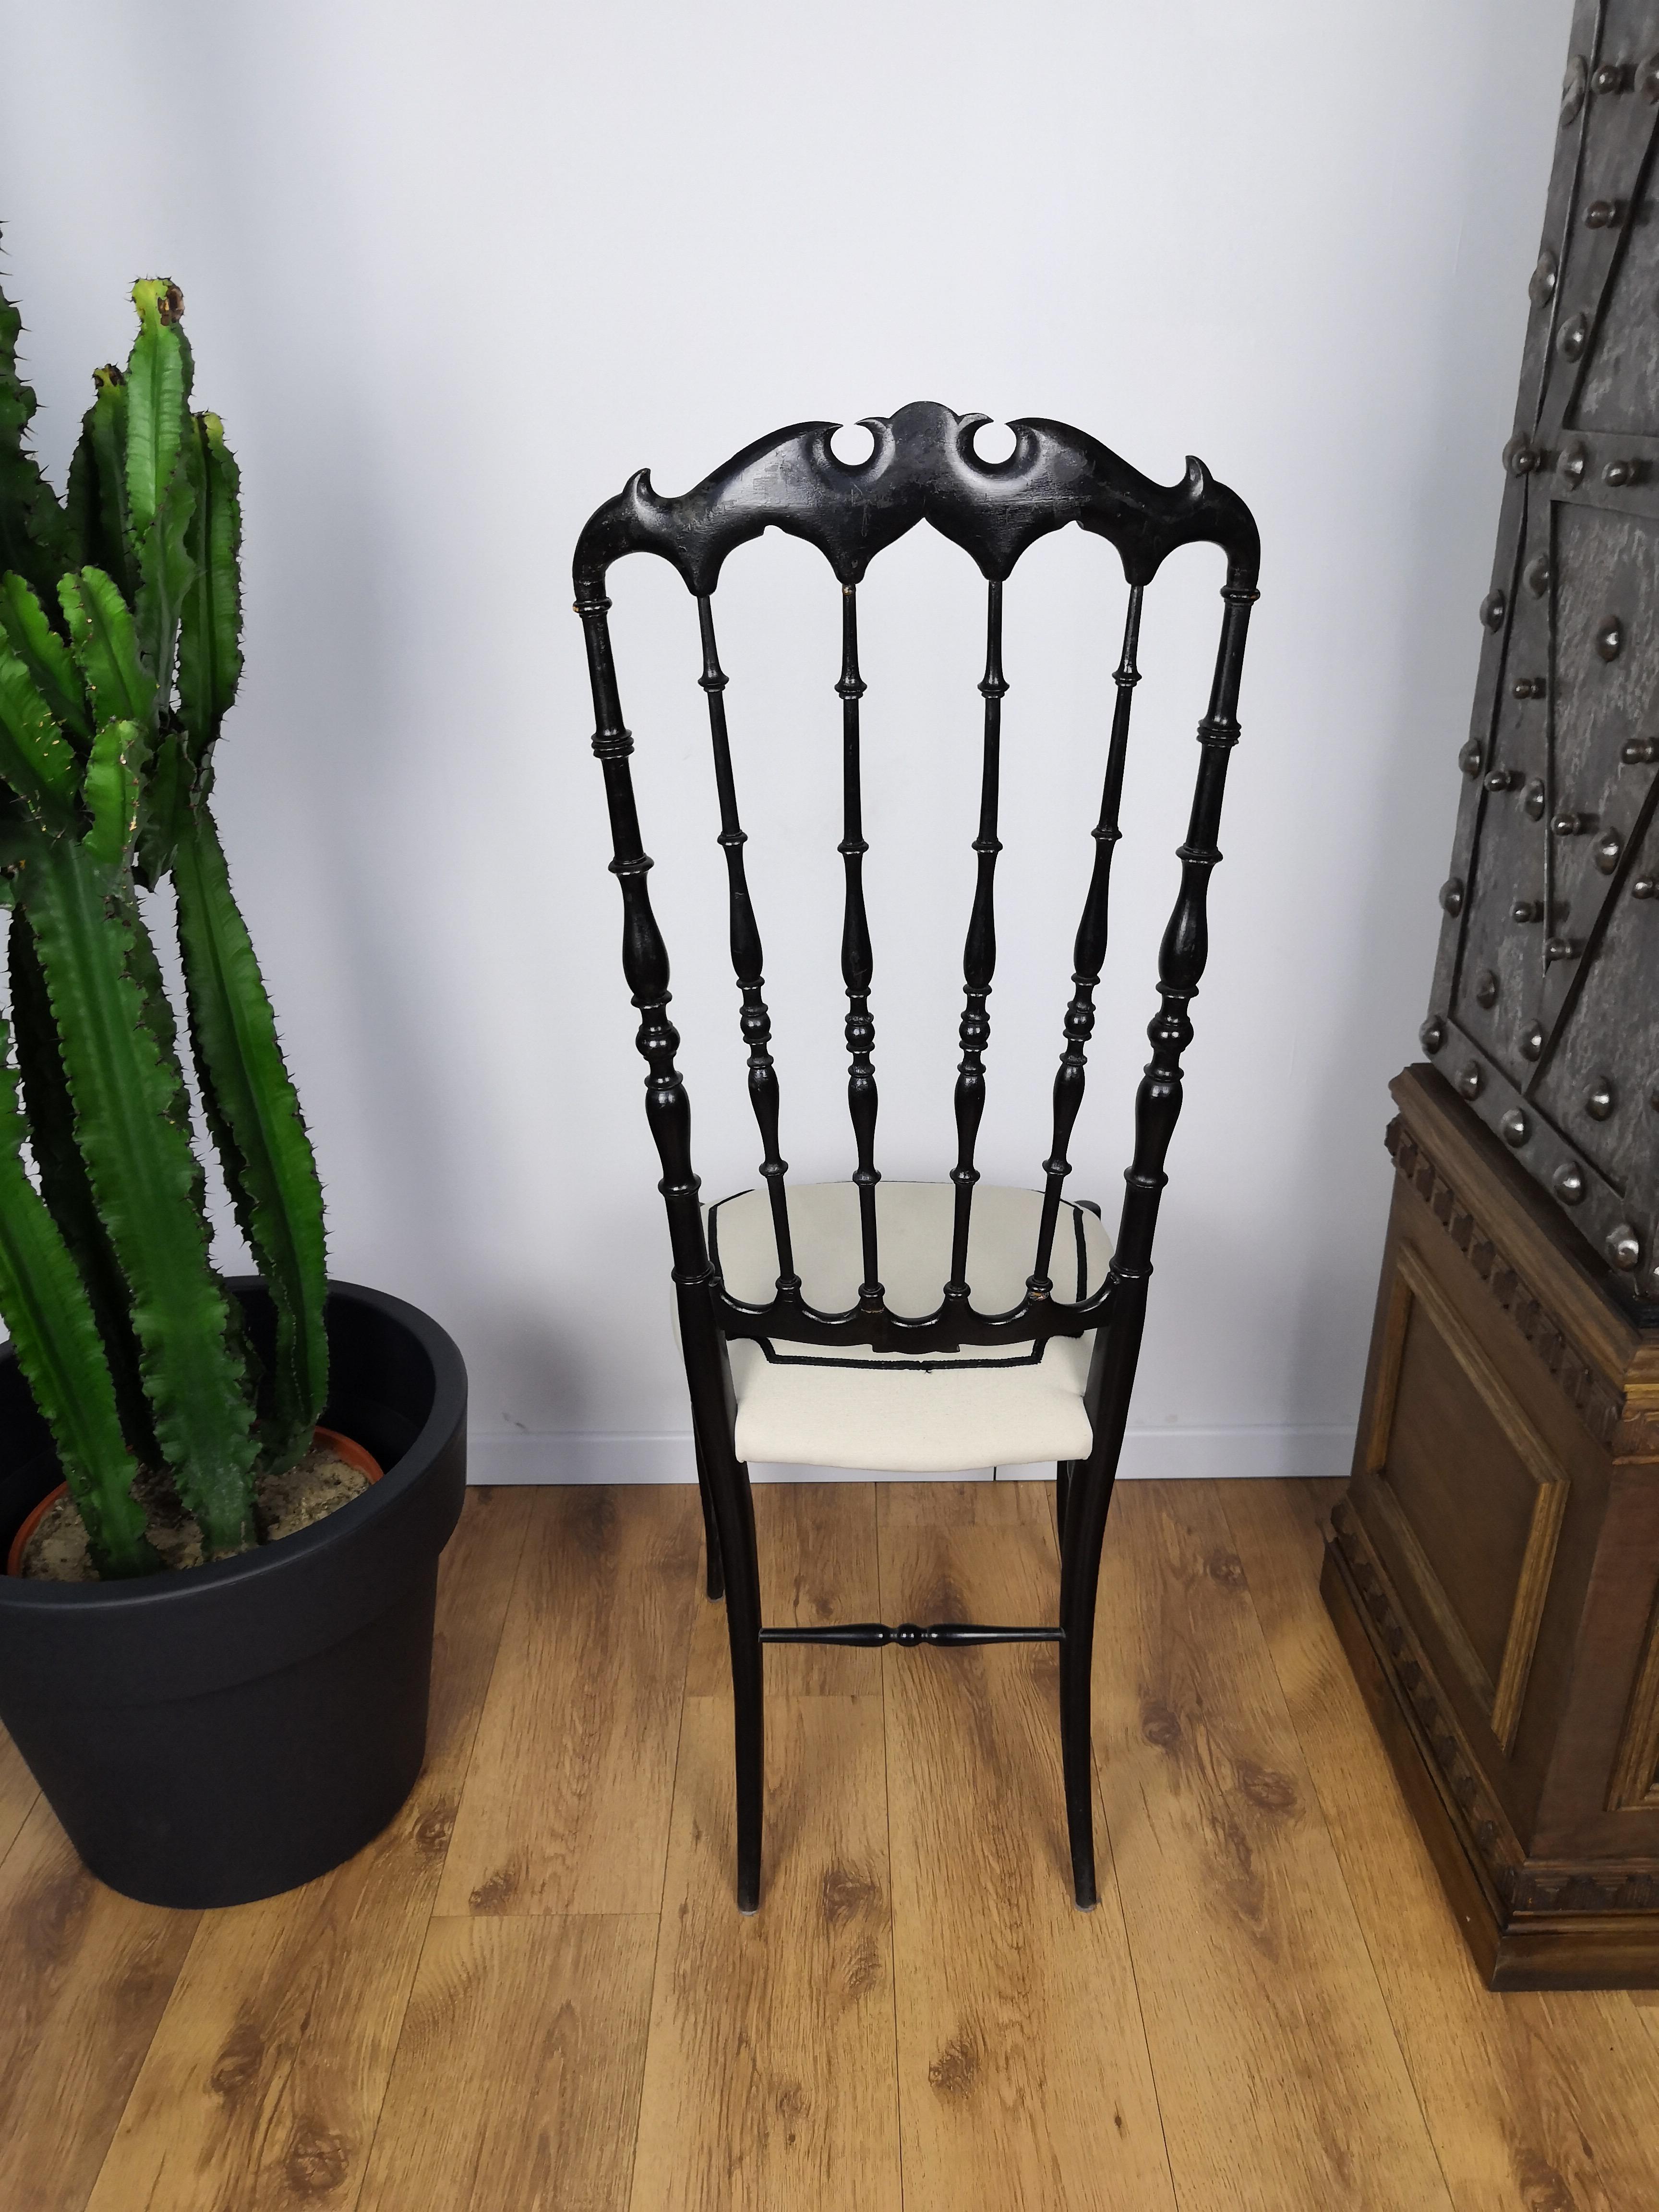 20th Century 1970s Italian Carved Wood Black Chiavari Chair in Contemporary Modern Upholstery